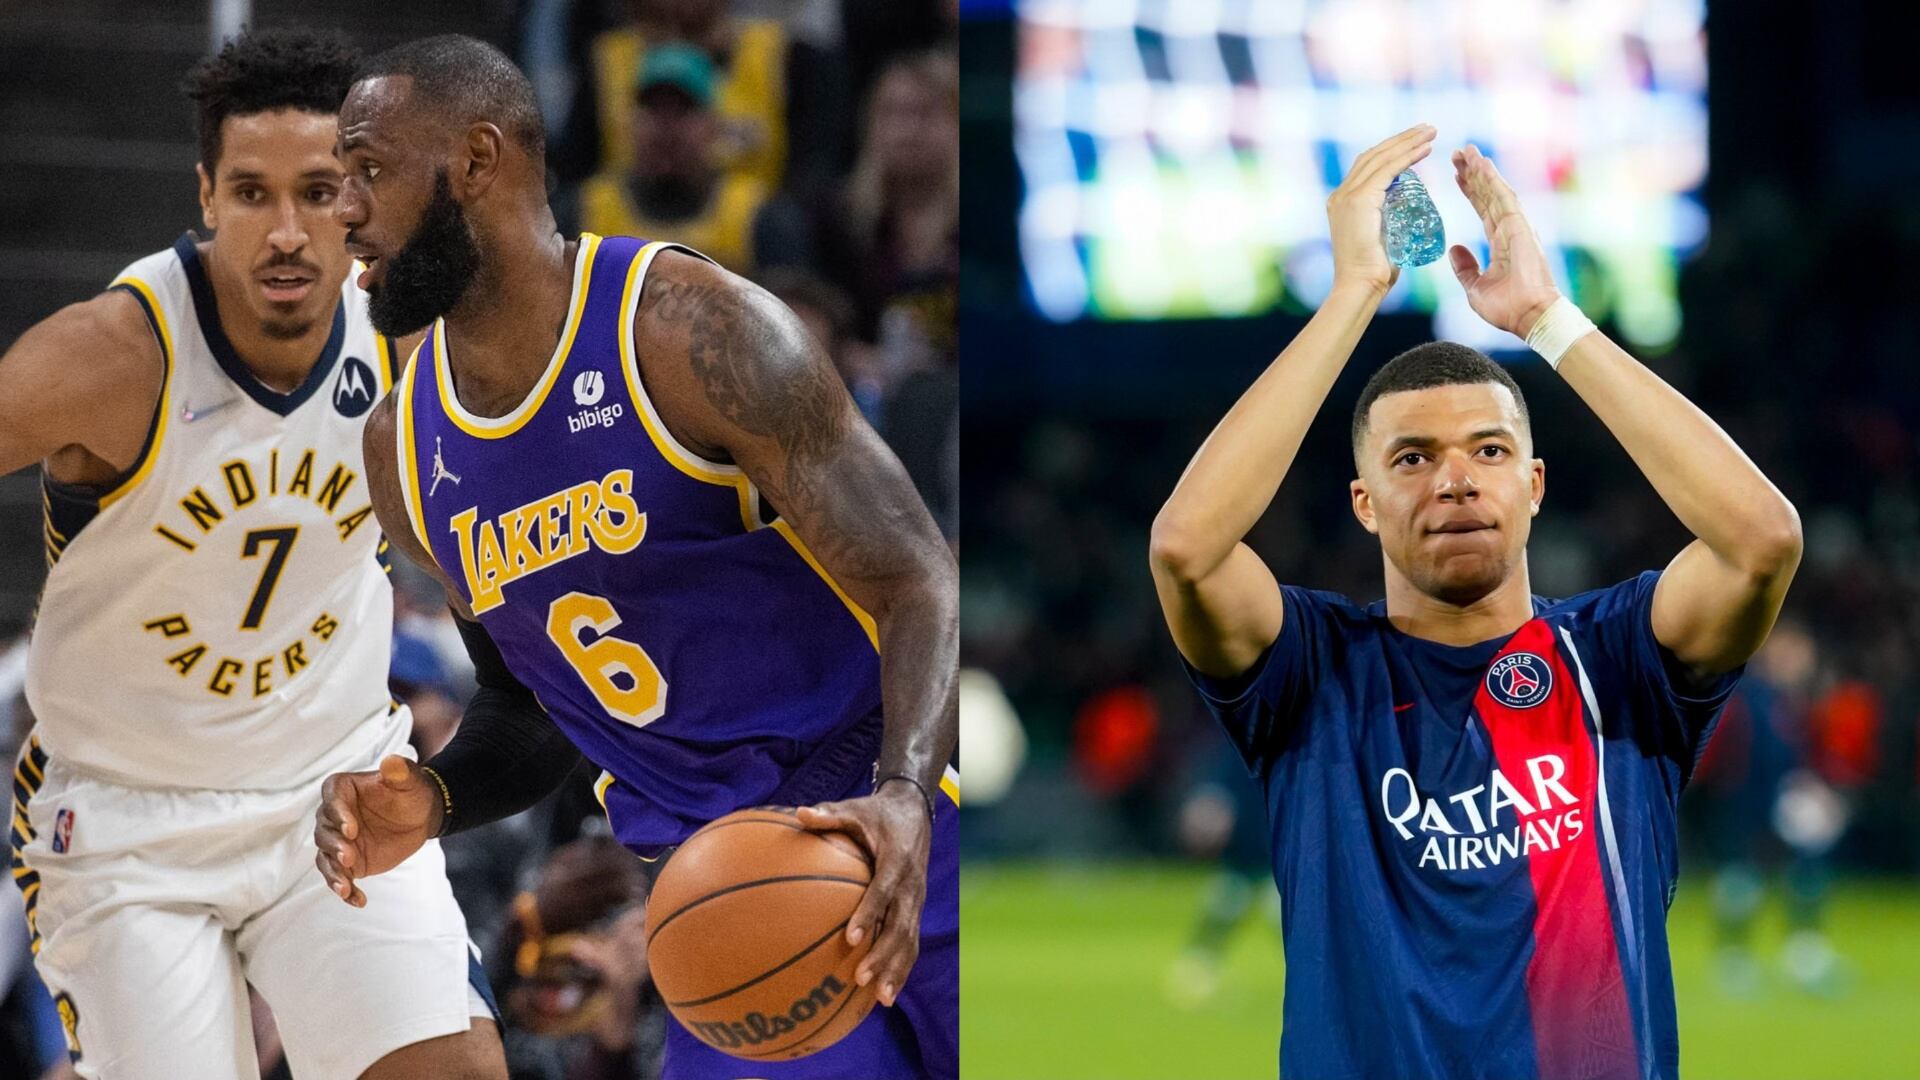 NBA player tells Mbappé not join Real Madrid and to play in England instead